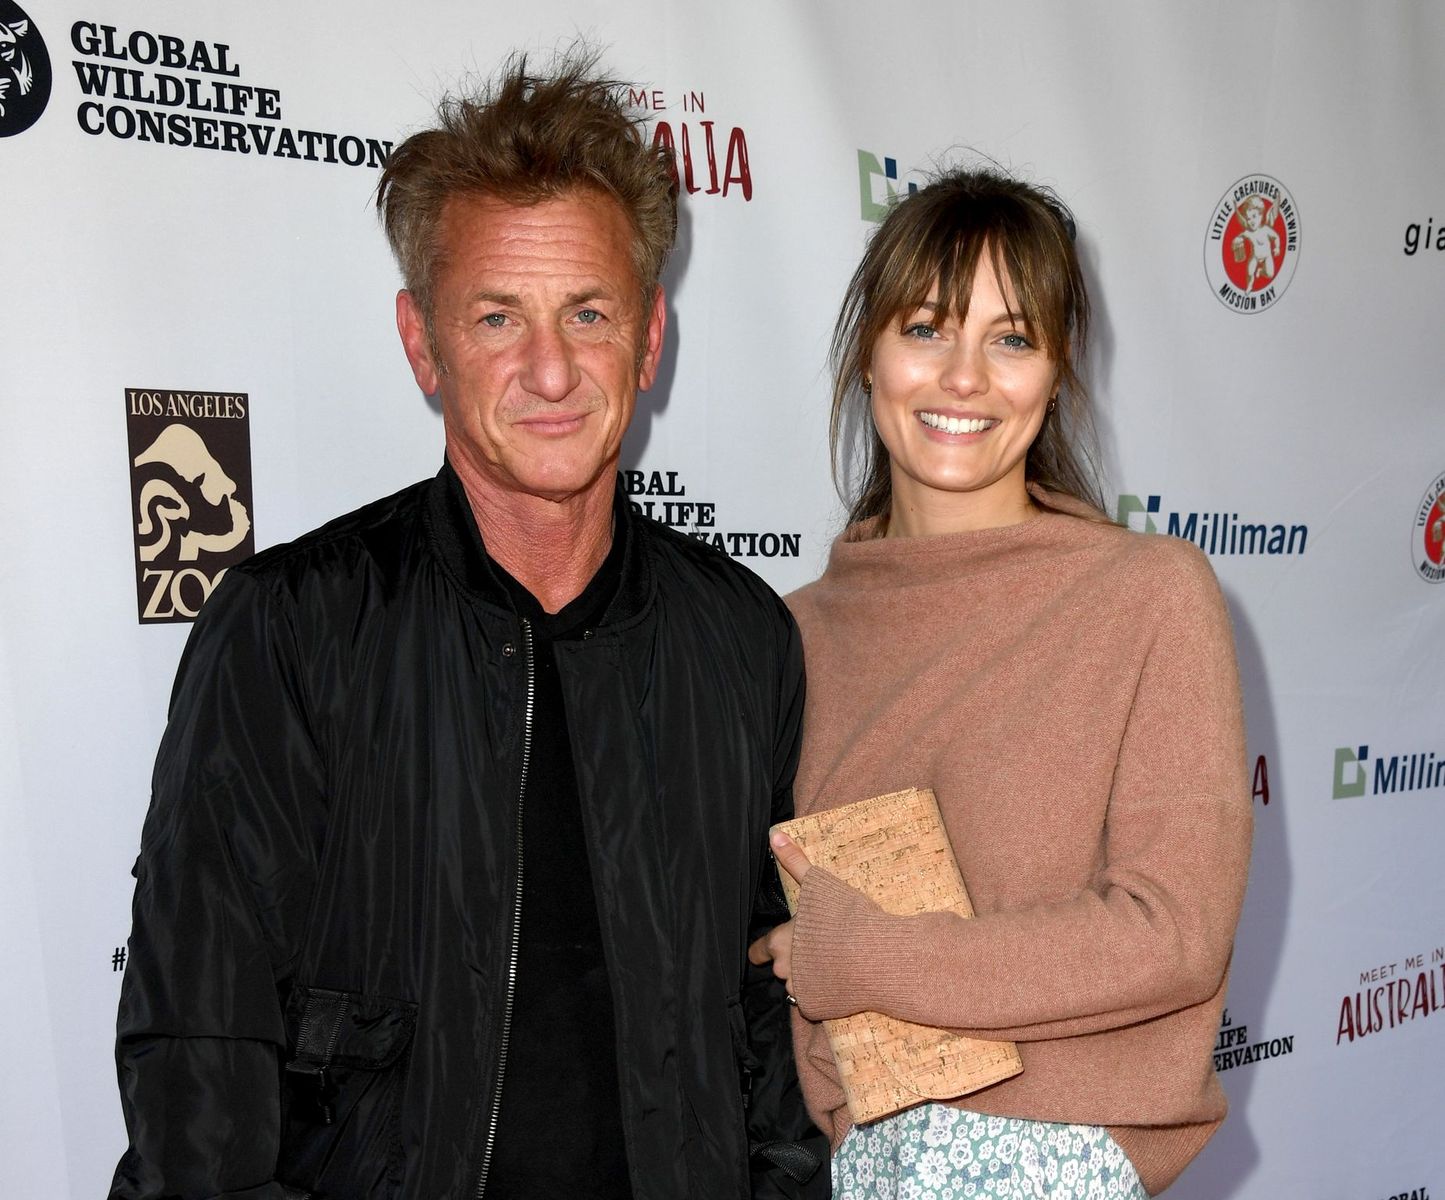 Sean Penn and Leila George at the "Meet Me In Australia" event benefiting Australia Wildfire Relief Efforts at Los Angeles Zoo on March 08, 2020, in California | Photo: Getty Images